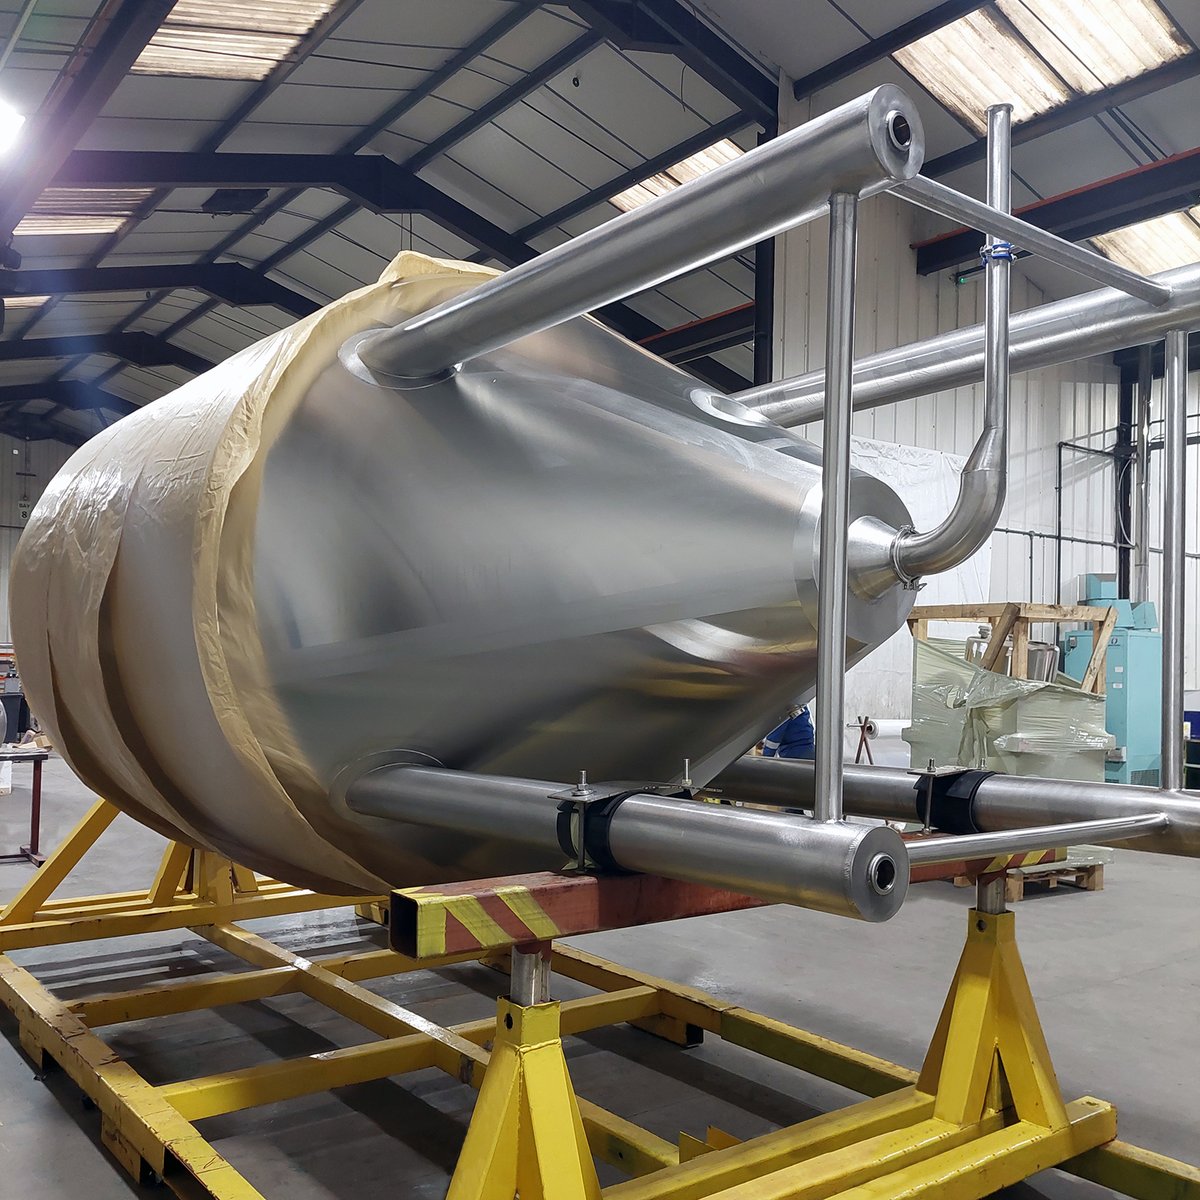 Another quality tank being wrapped up 💪

Do you need a new stainless steel vessel for your business?

Get in touch and we'll make it a reality!

#wrapped #wrappedvessel #fabdec #britanx #beerindustry #stainlesssteel #ukmanufacturer #DPV #ukmanufacturing #ukmfg #madeinbritain